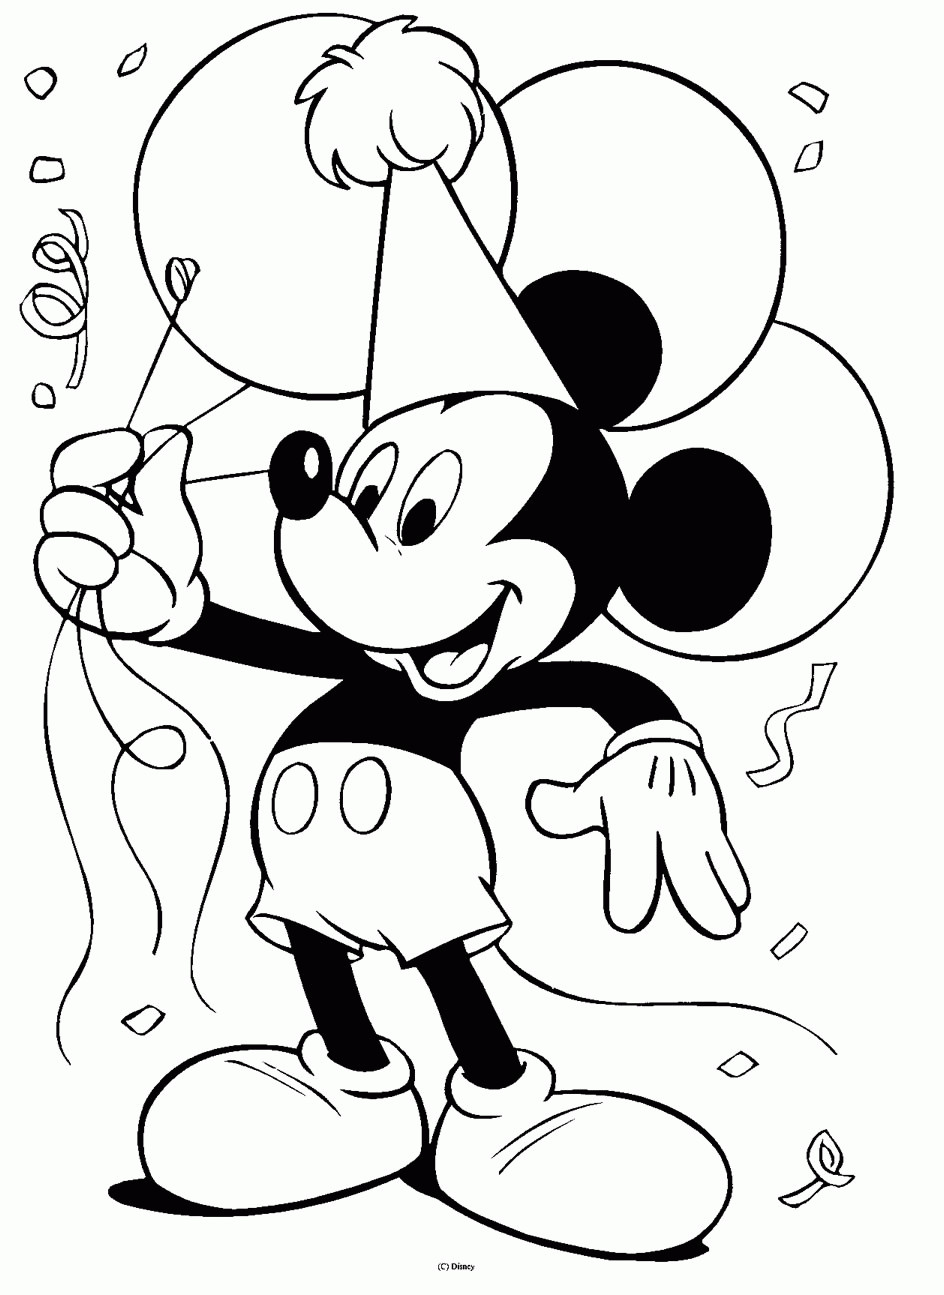 Disney Coloring Sheets Printable
 DISNEY COLORING PAGES